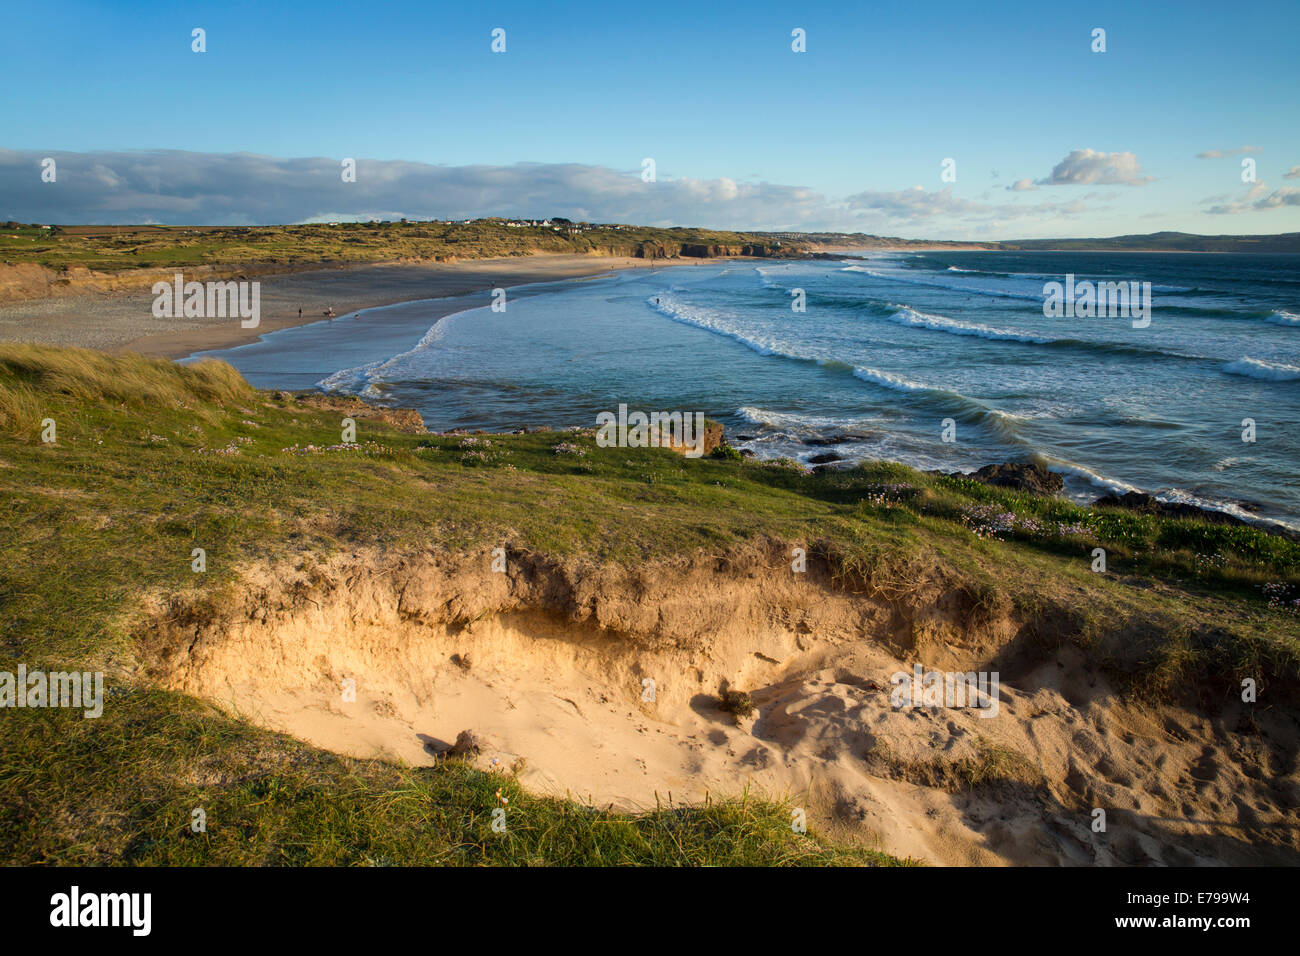 Gwithian ; baie de St Ives, Cornwall, UK Banque D'Images